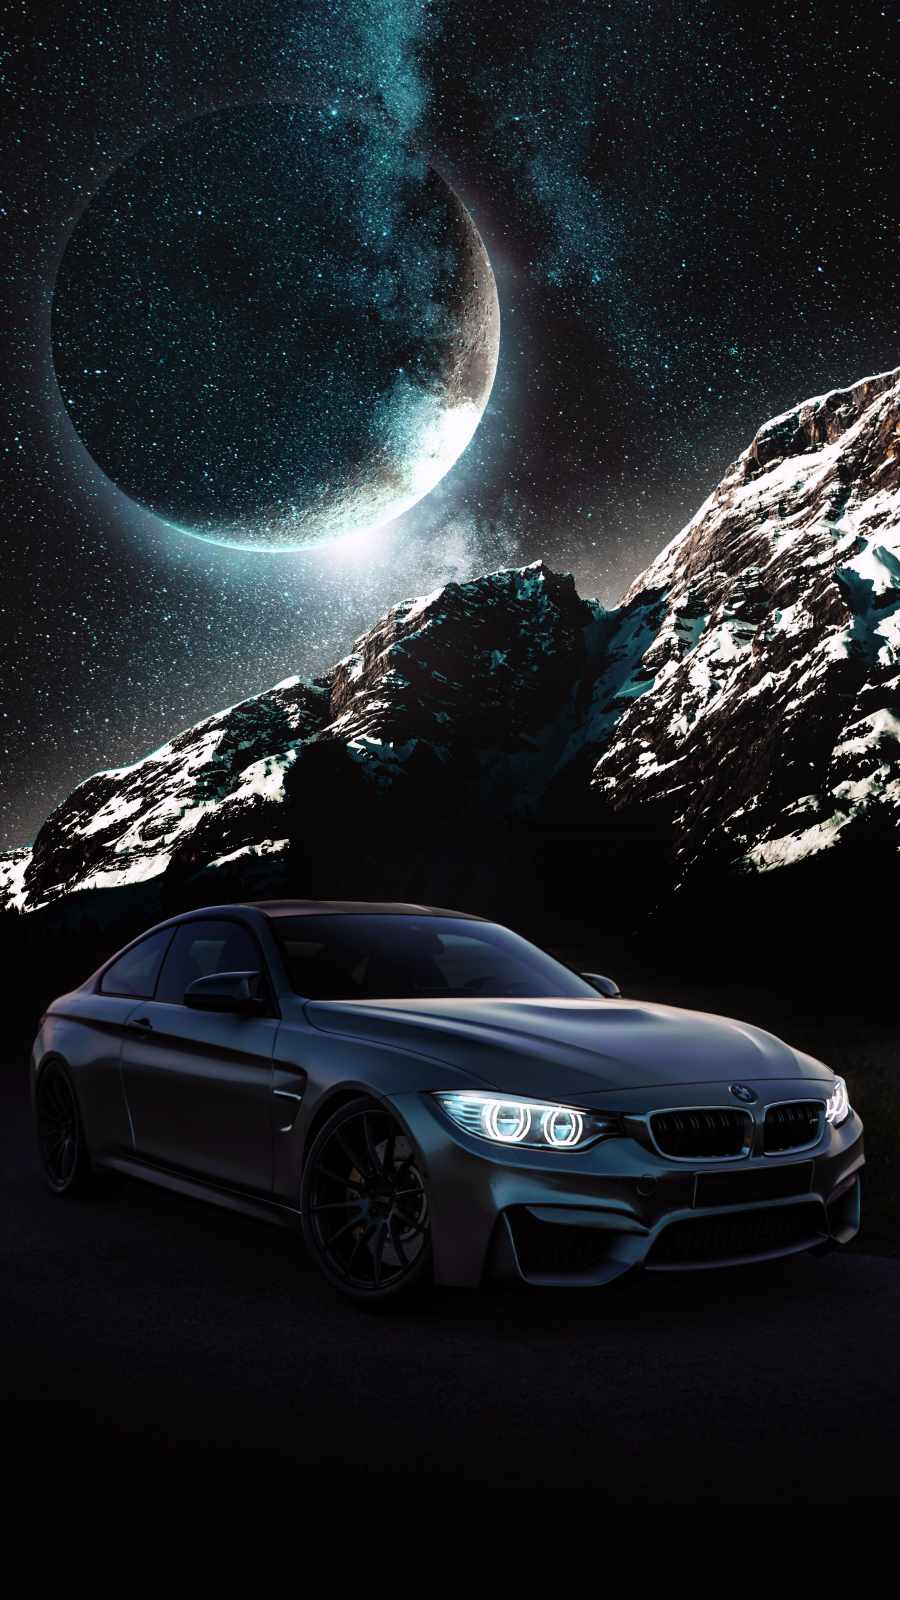 Space BMW iPhone Wallpaper